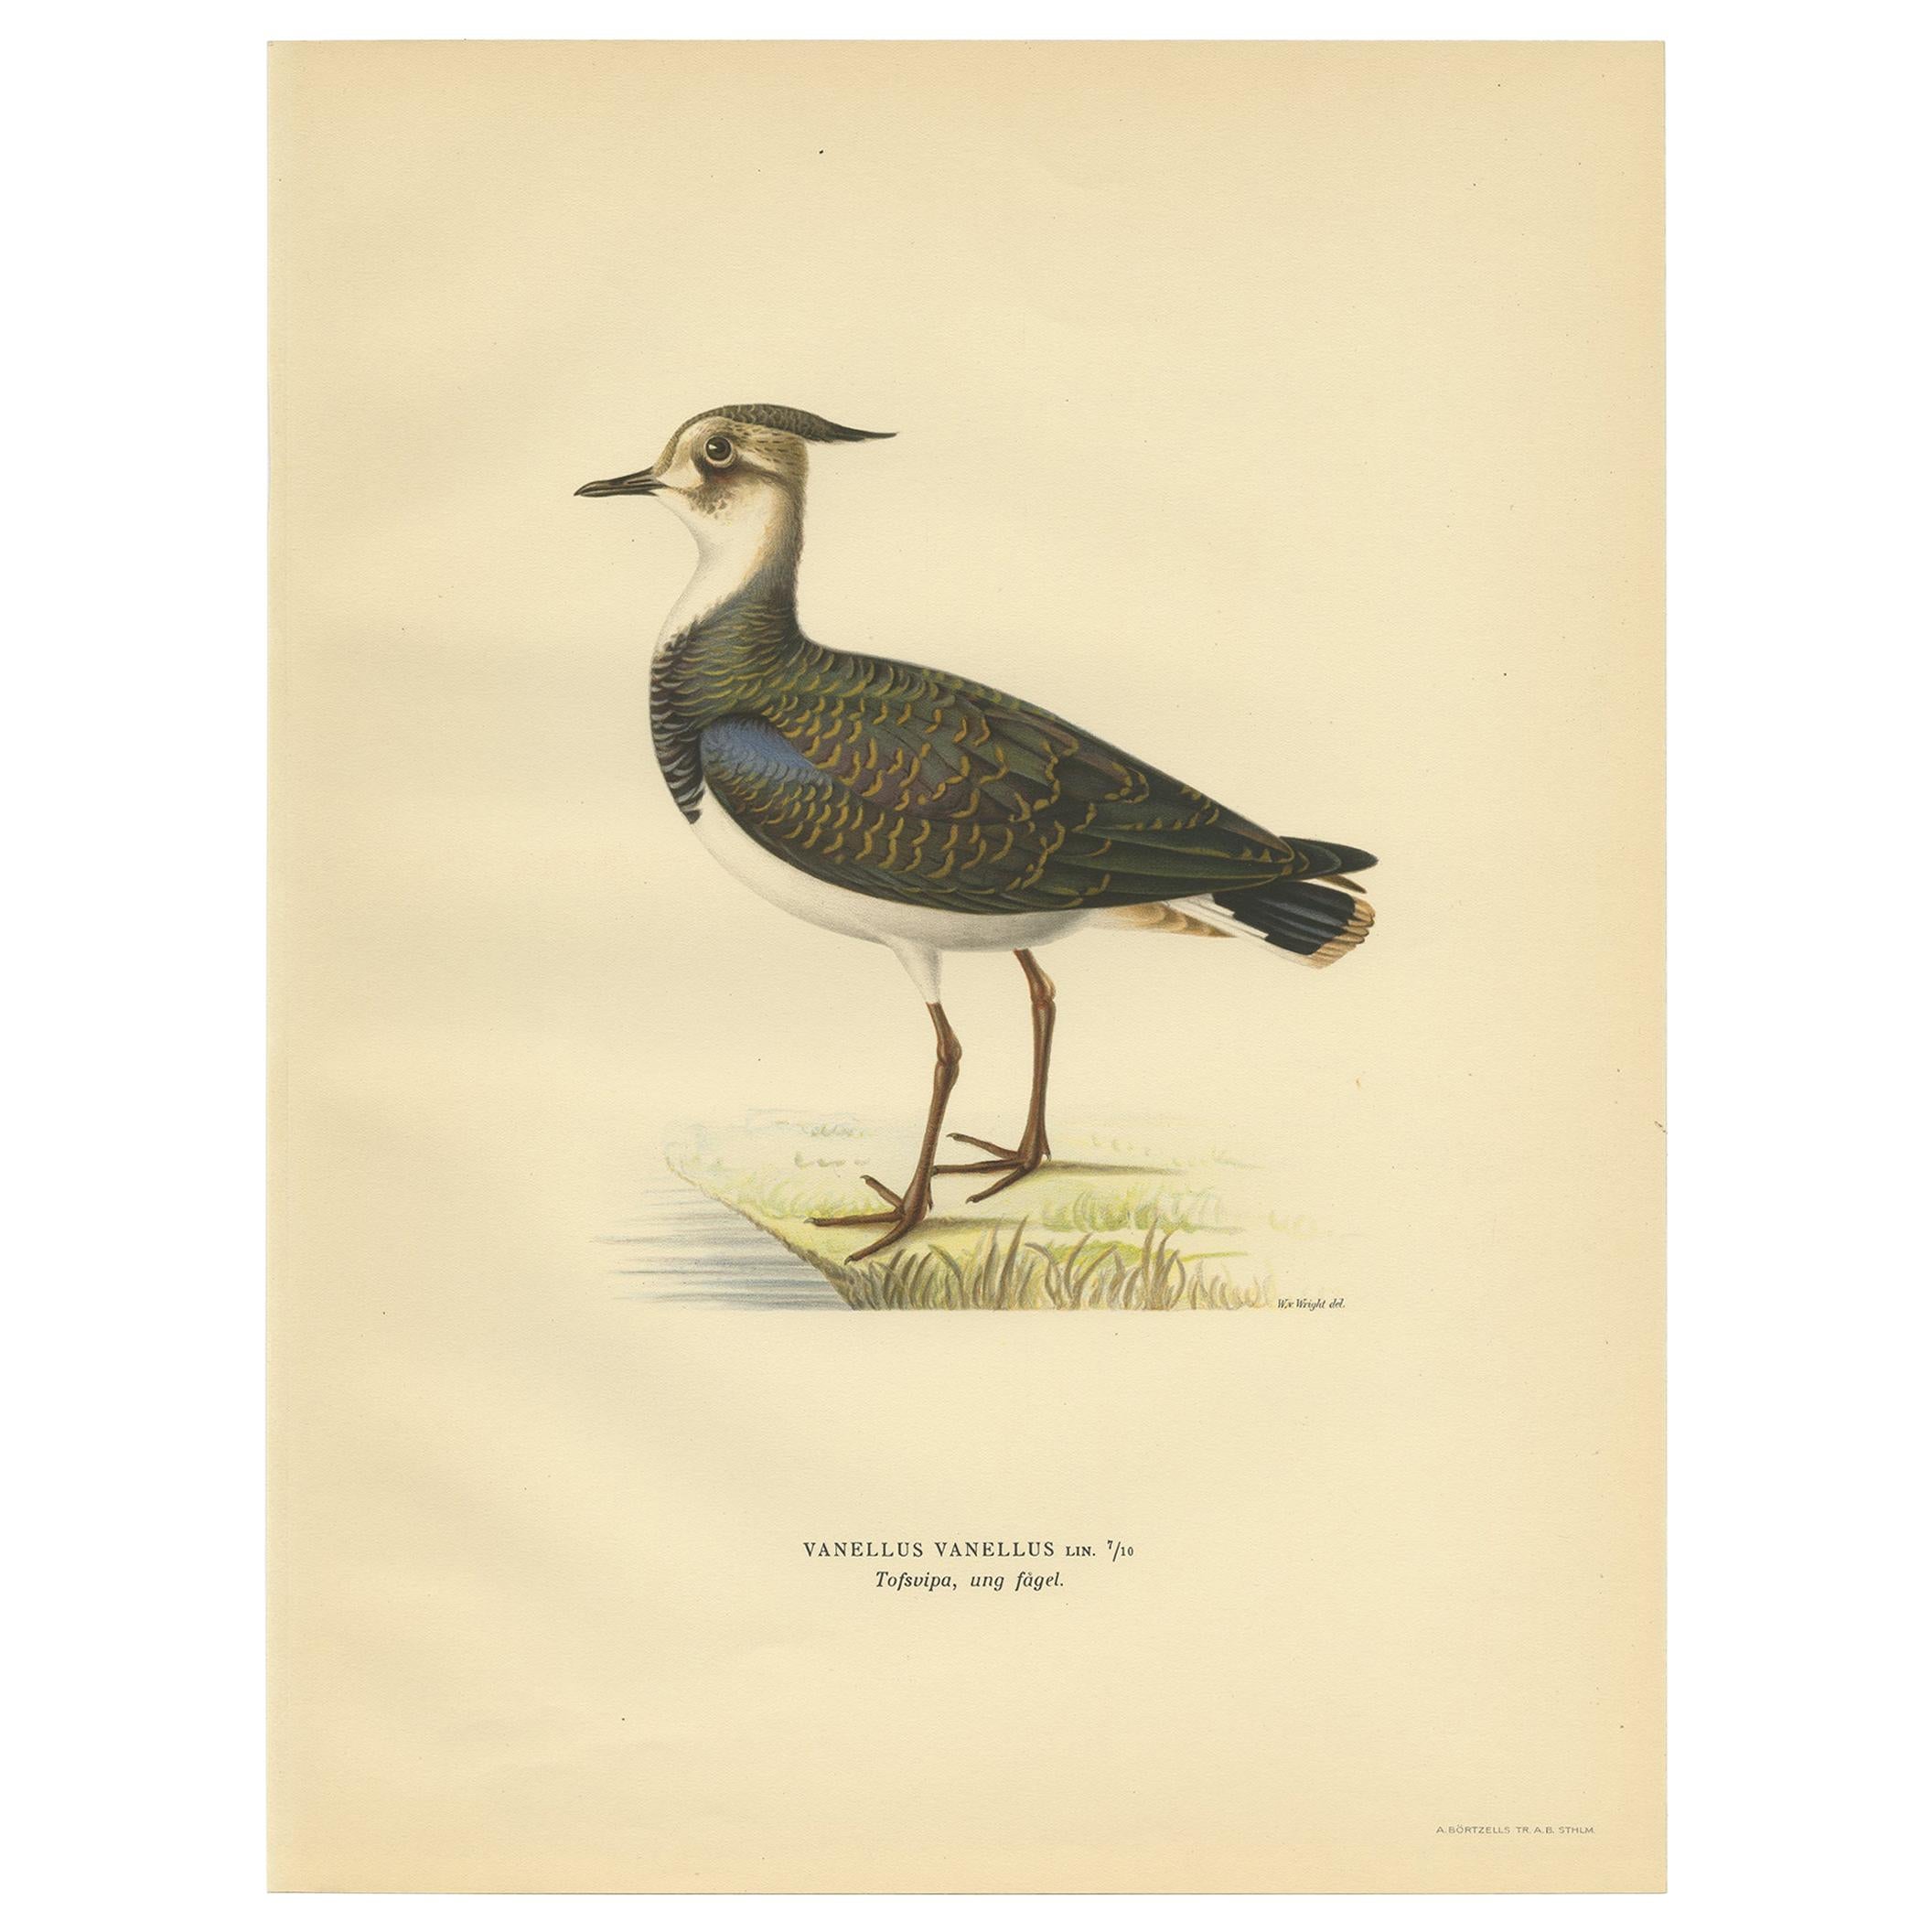 Antique Bird Print of the Northern Lapwing by Von Wright, 1929